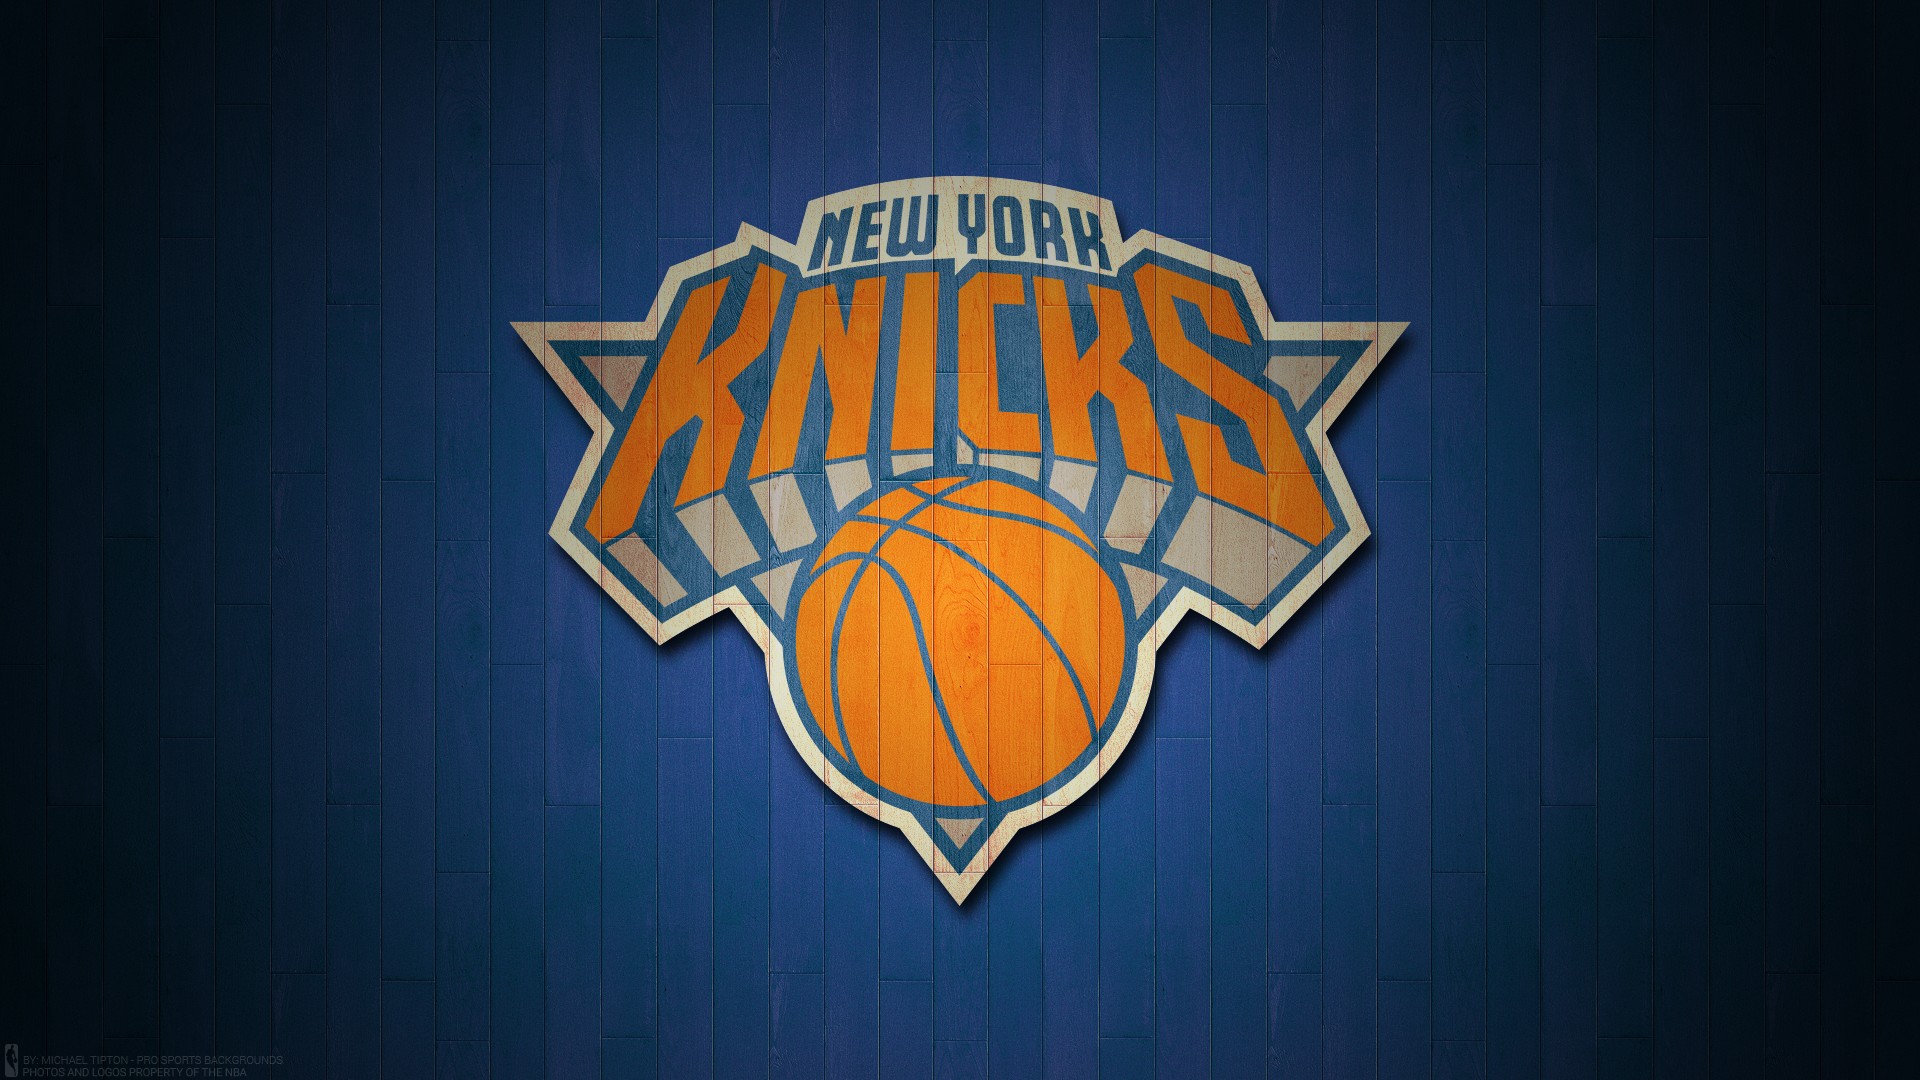 NY Knicks Wallpaper HD with image dimensions 1920x1080 pixel. You can make this wallpaper for your Desktop Computer Backgrounds, Windows or Mac Screensavers, iPhone Lock screen, Tablet or Android and another Mobile Phone device